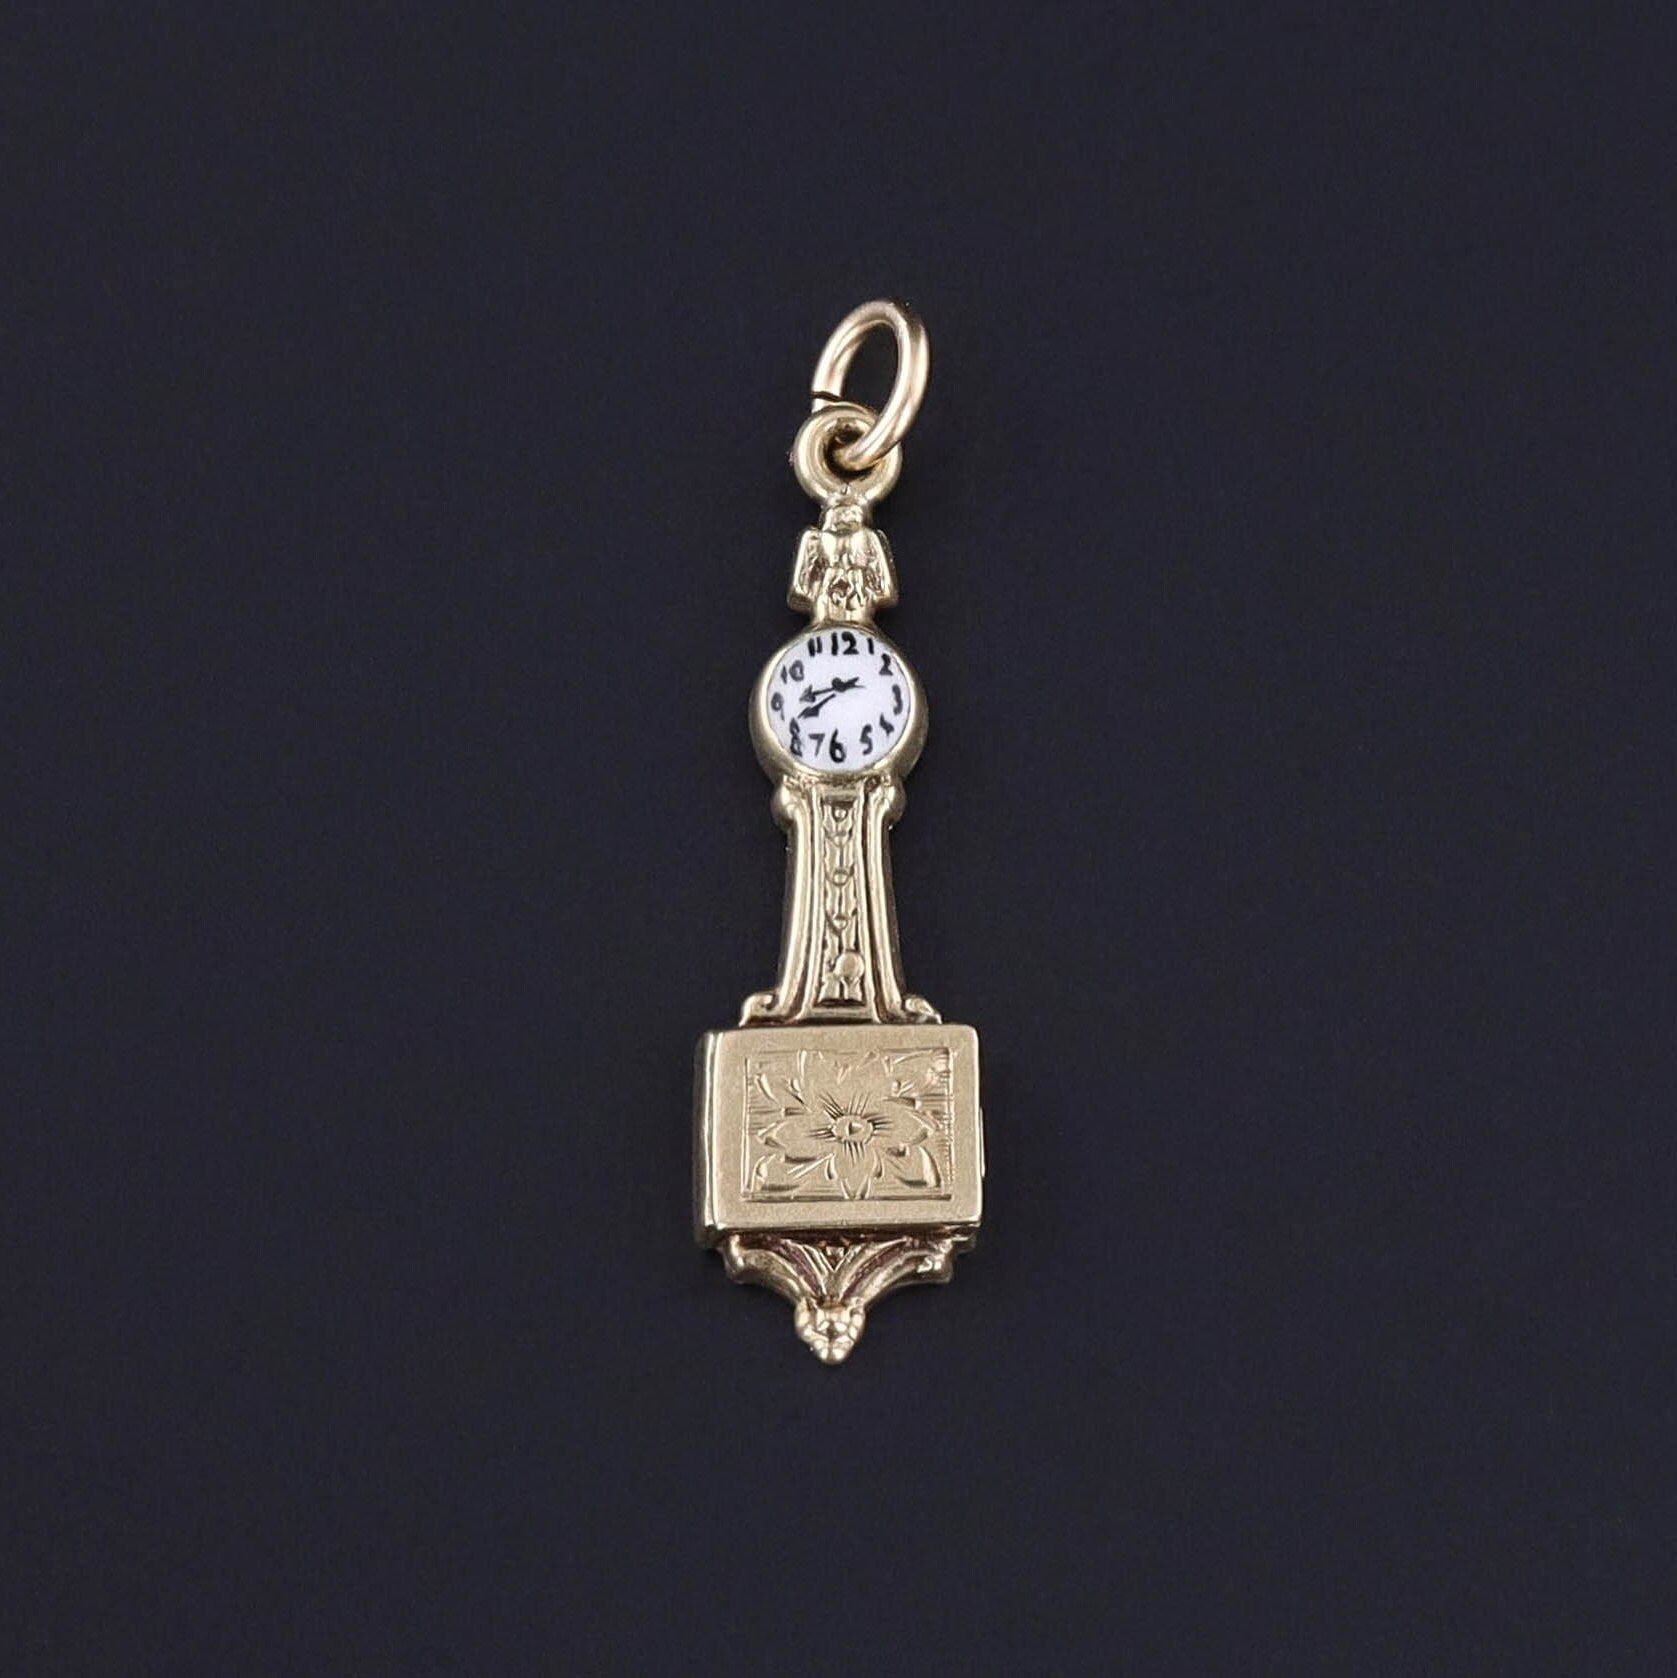 Vintage Grandfather Clock Charm: Explore the vintage allure of this well rendered charm by Sloan & Co. (circa 1930-1940). The charm depicts a grandfather clock with a face of pristine white enamel, and a hand etched floral design.